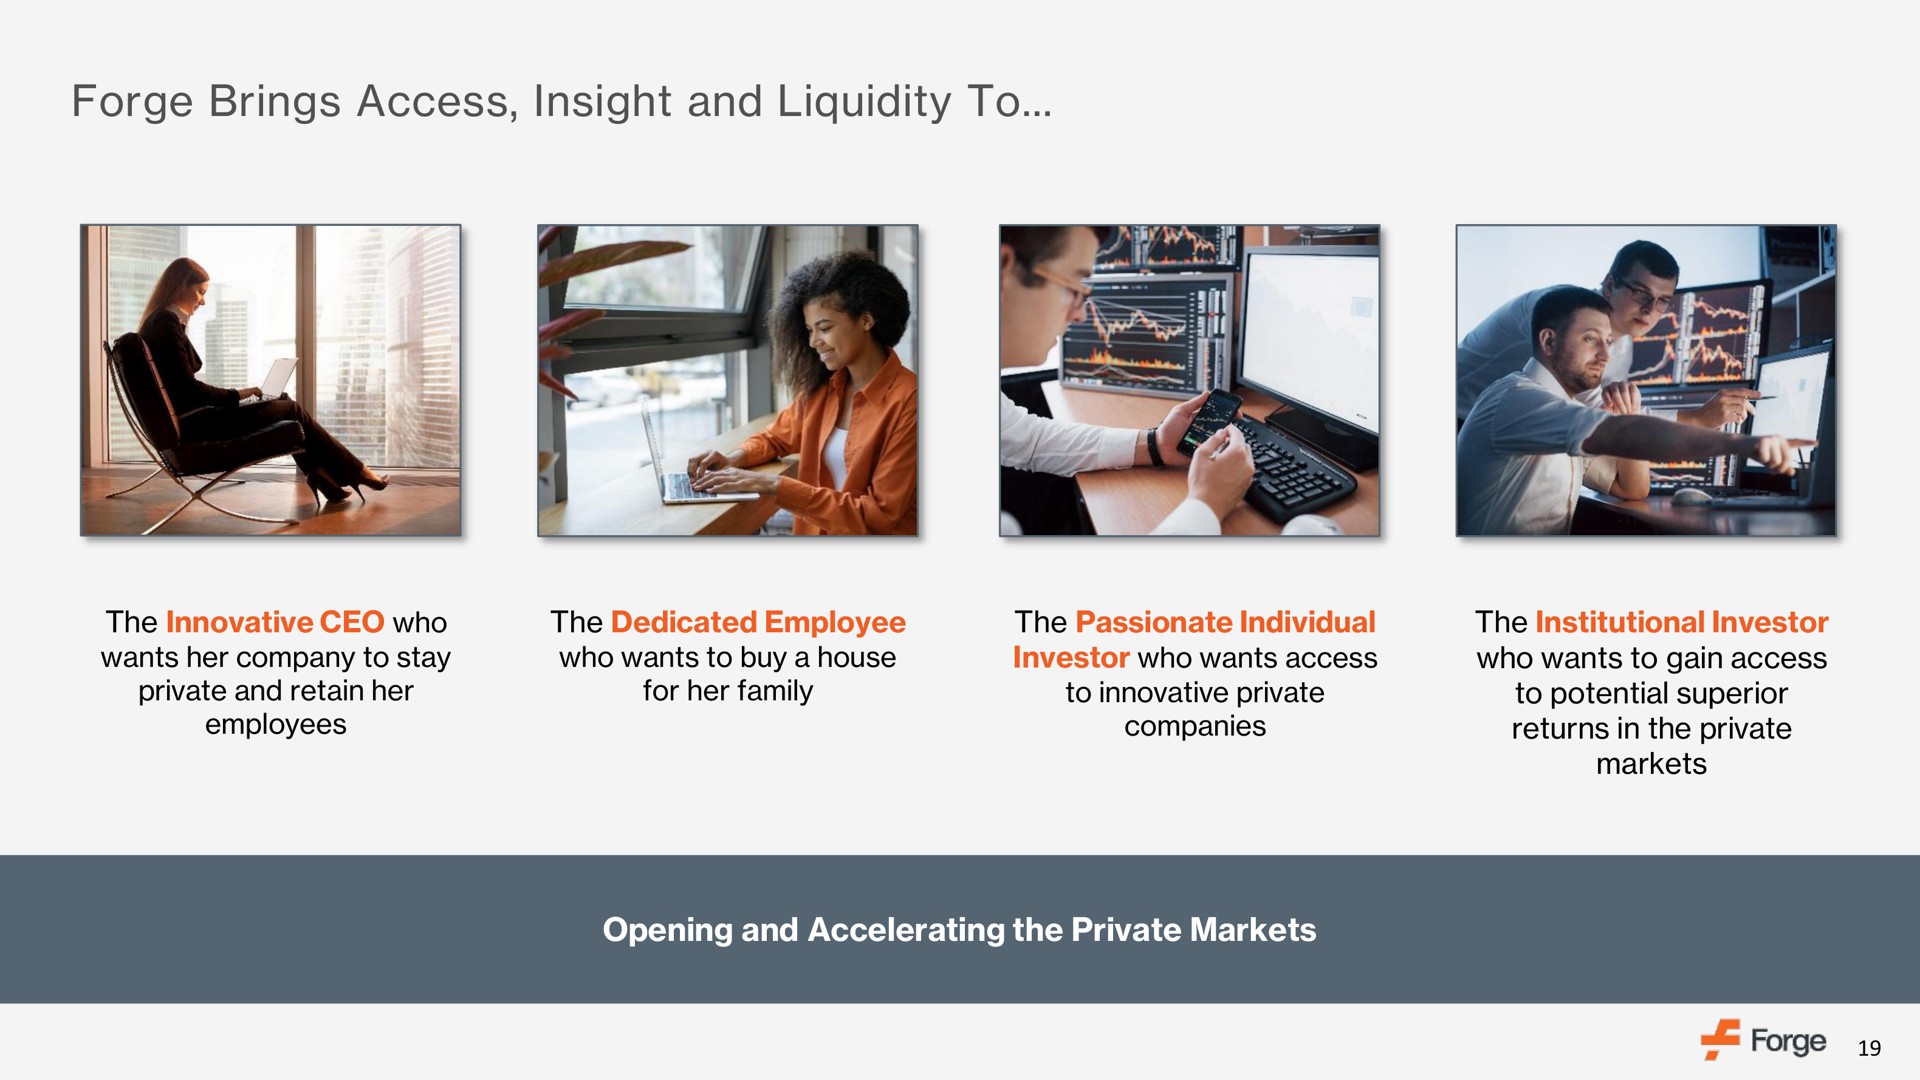 forge brings access insight and liquidity to | Forge